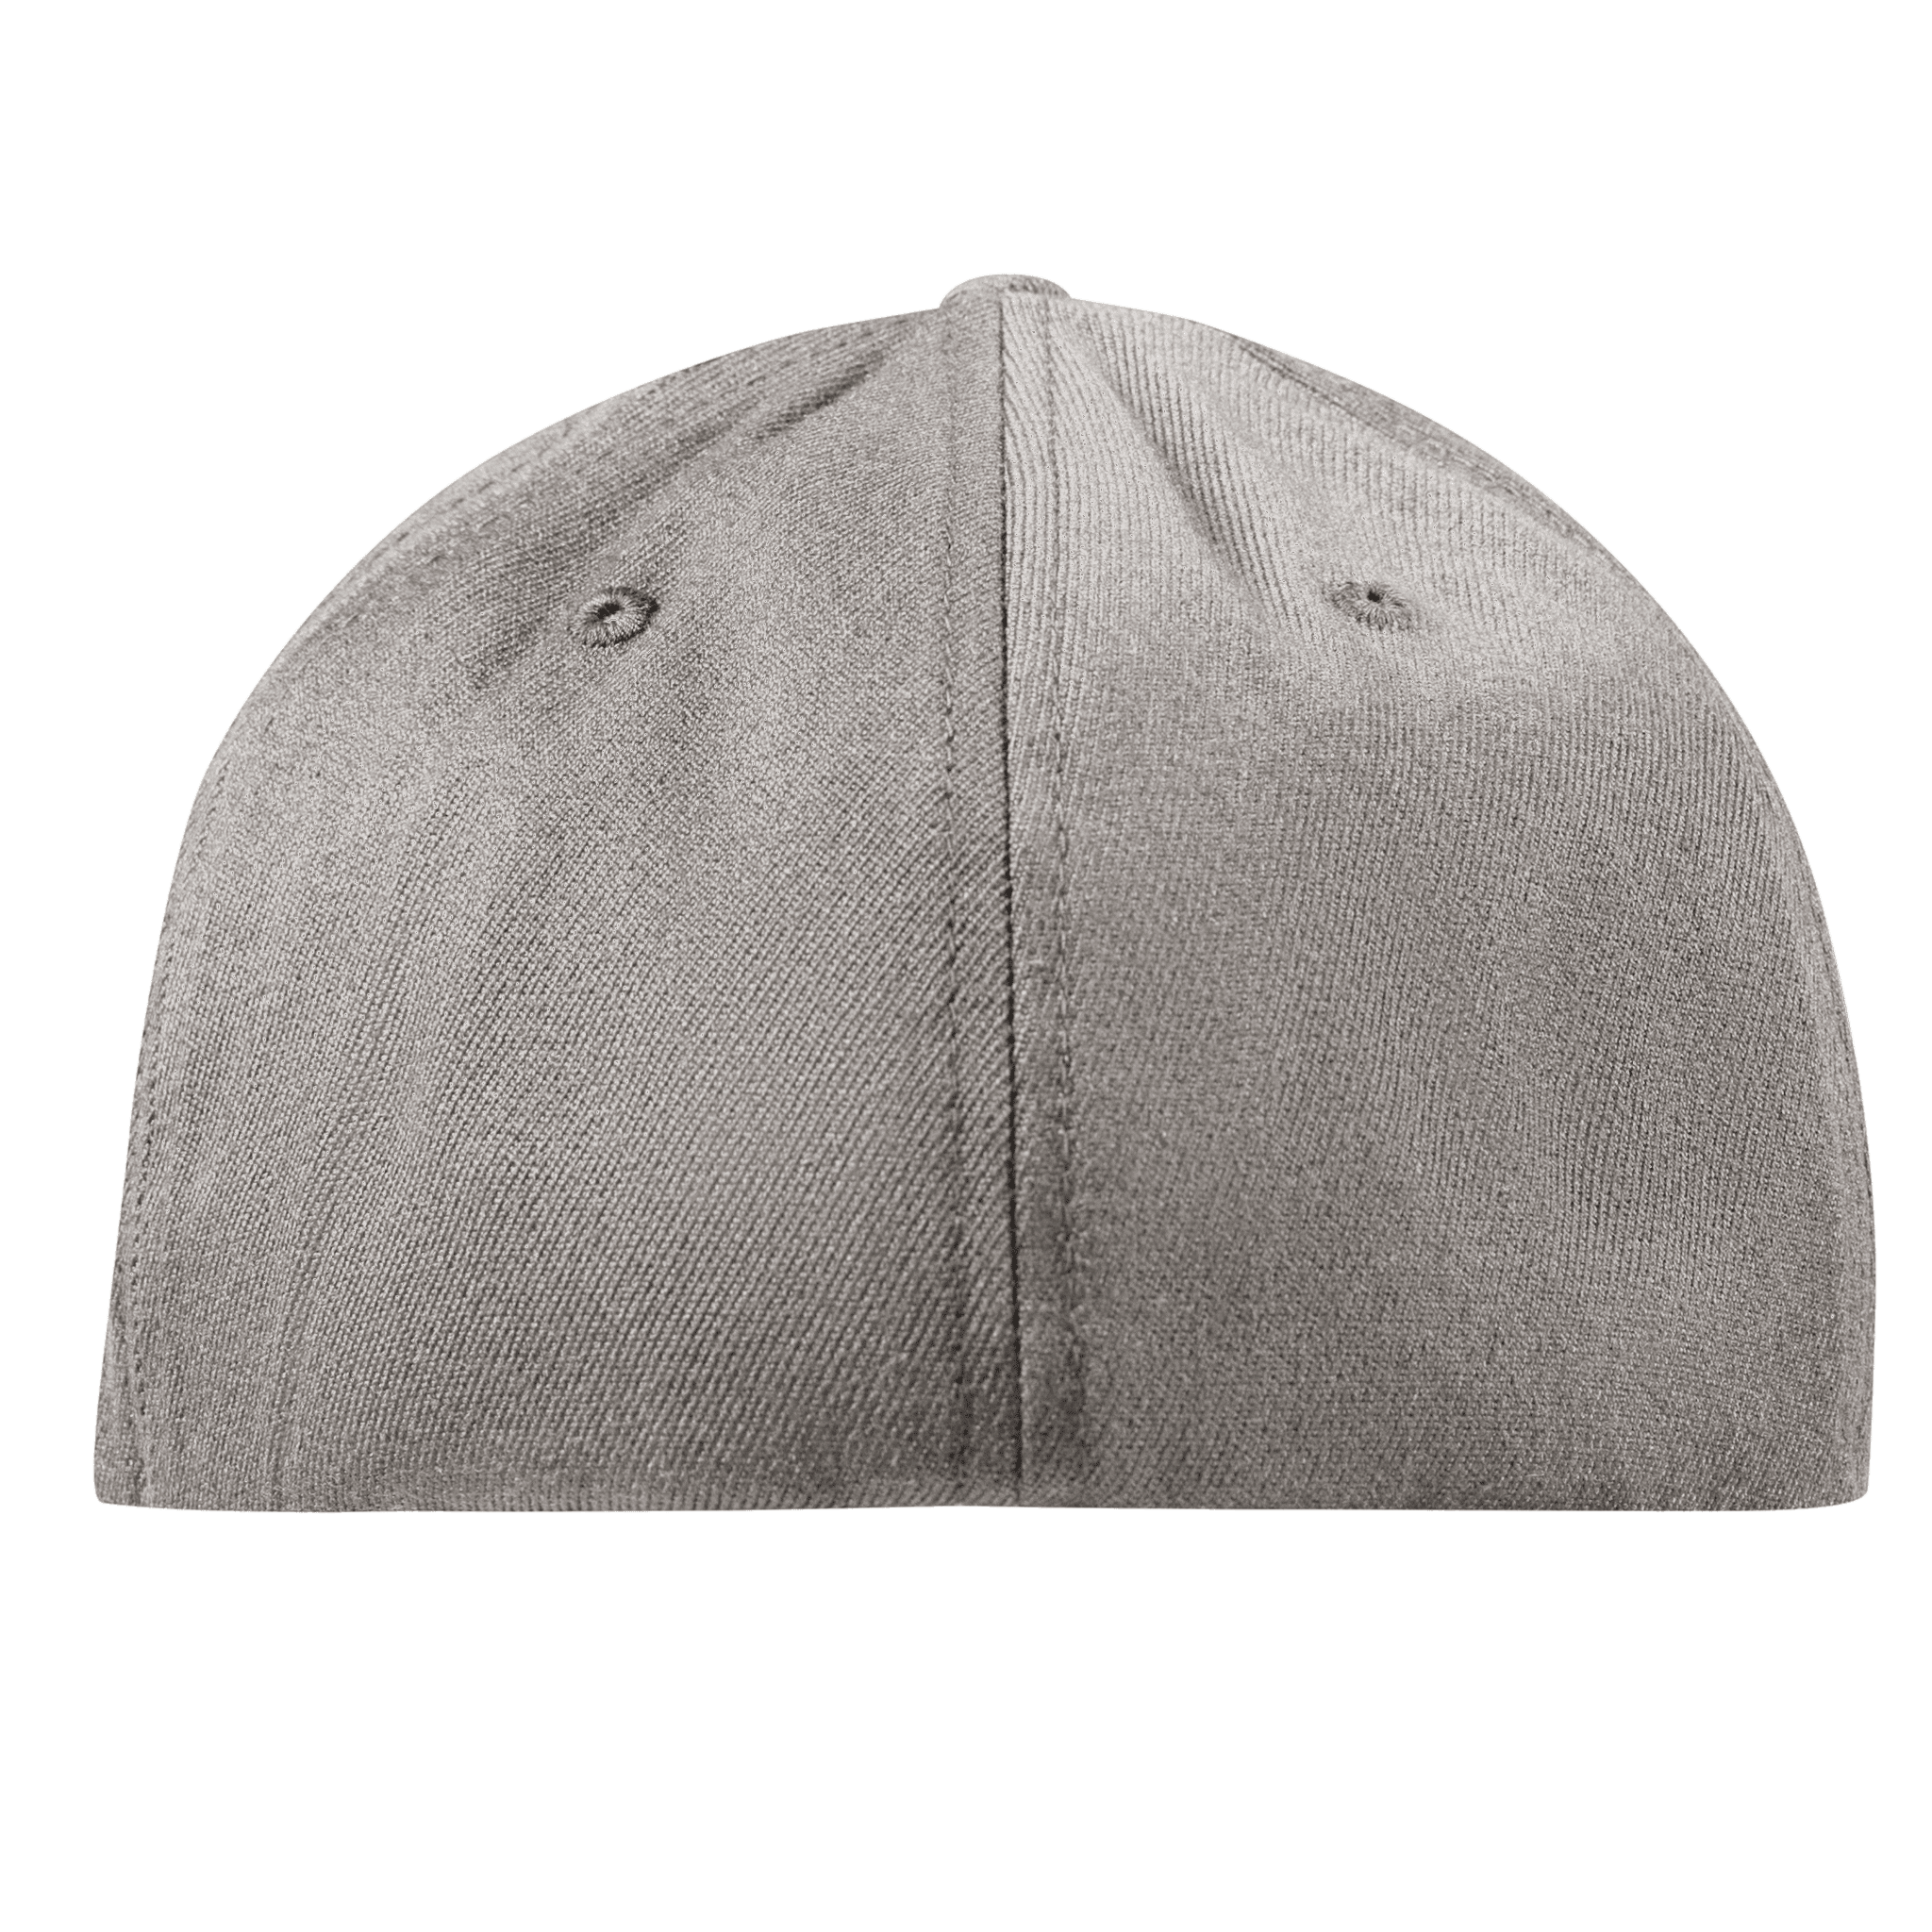 Wisconsin 30 Midnight Flexfit Fitted Back Heather Grey